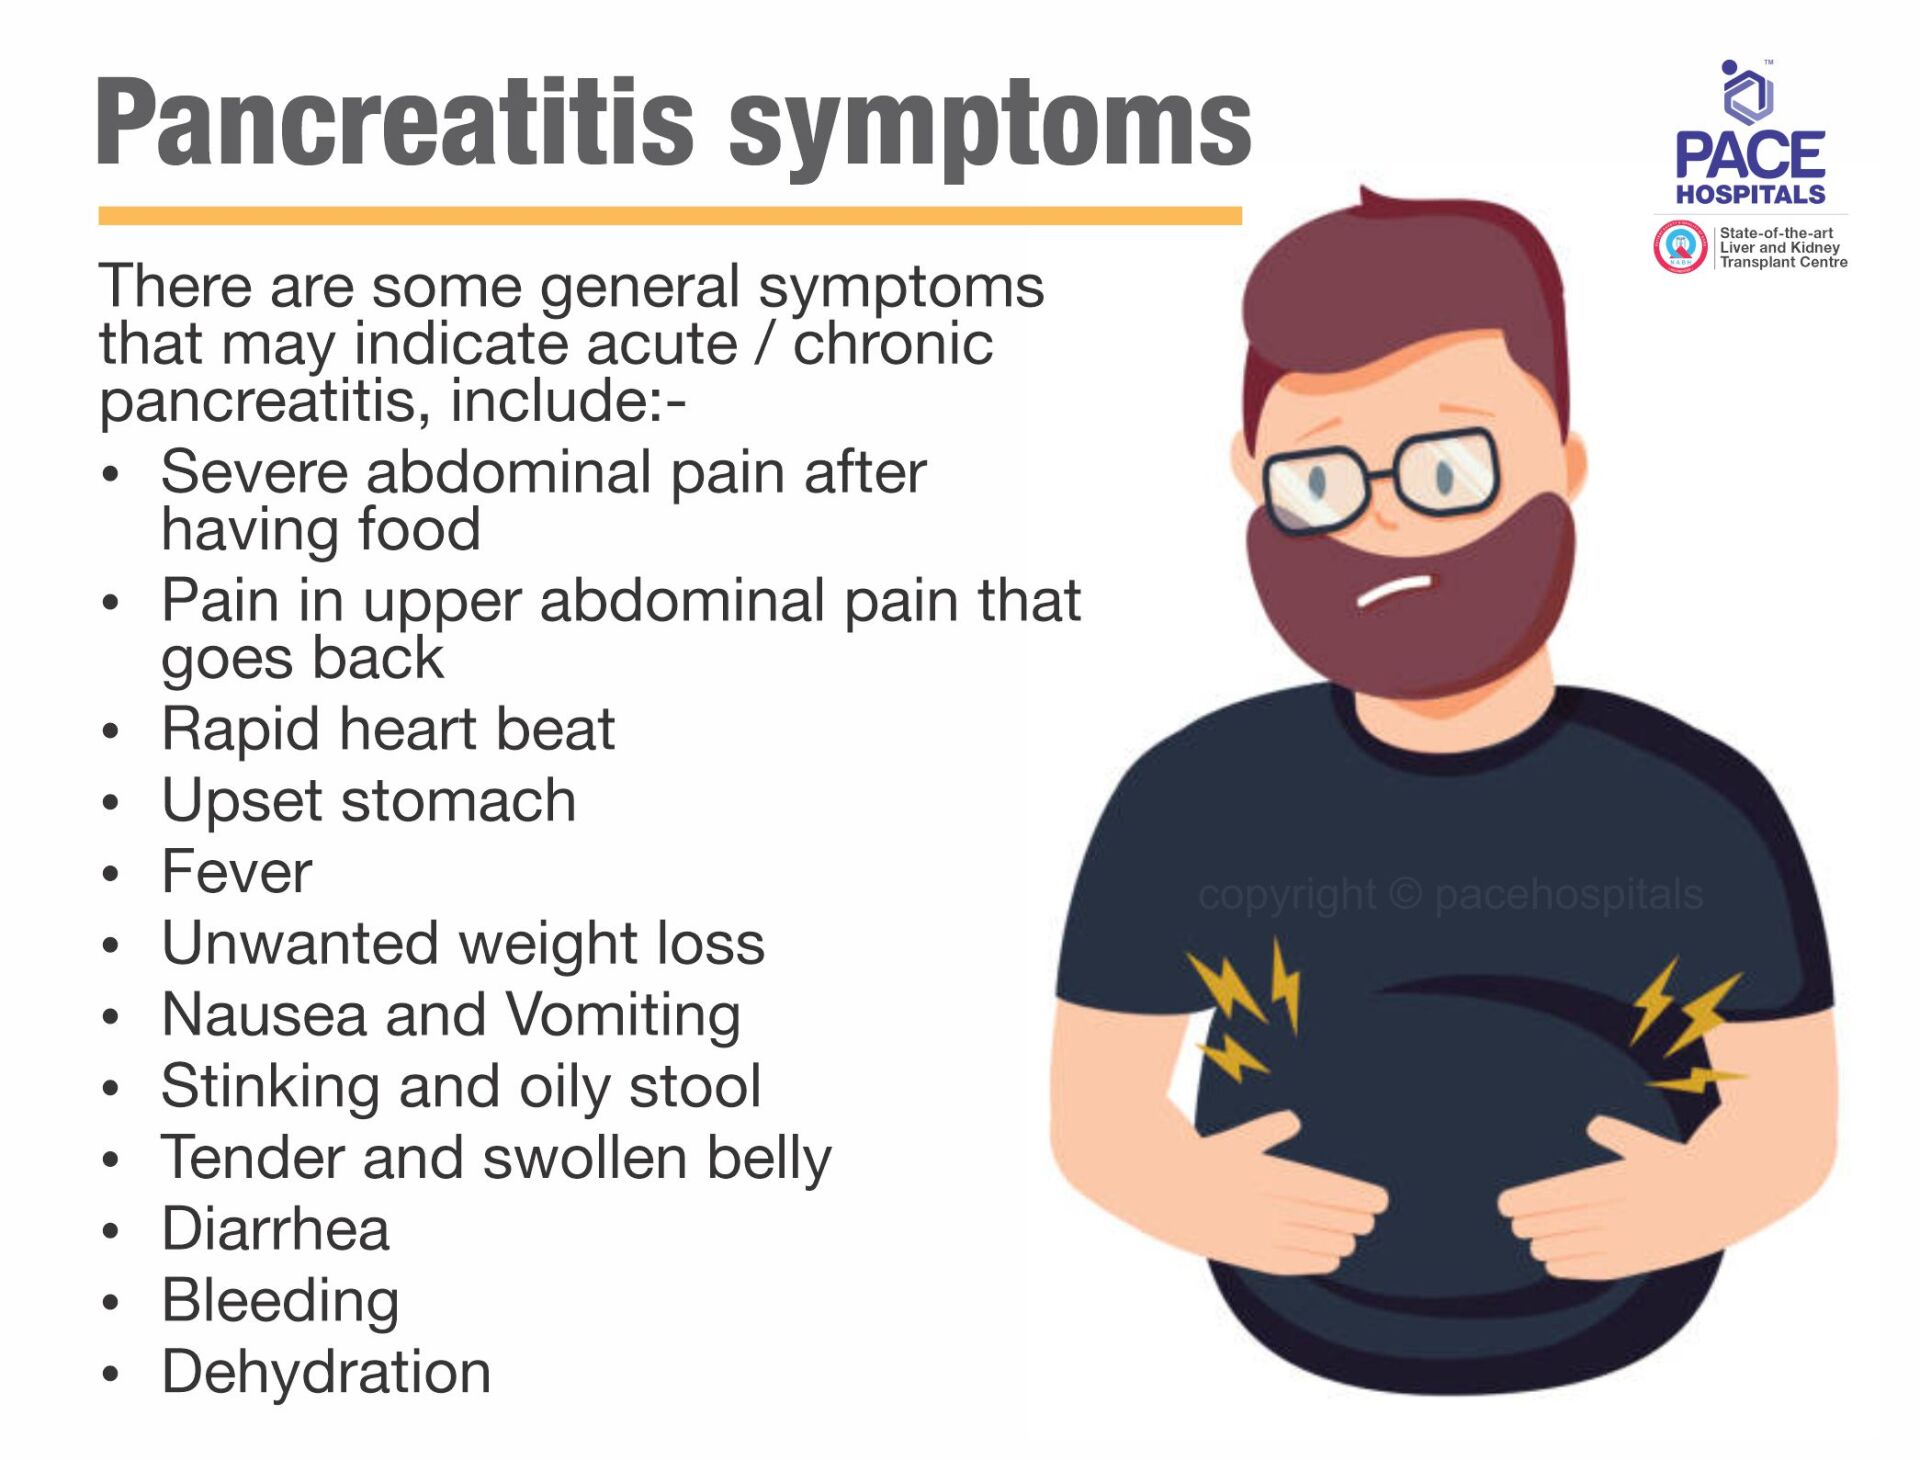 Early signs and symptoms of pancreatitis or pancreatic disease / disorder - Best hospital for pancreatitis treatment in Hyderabad